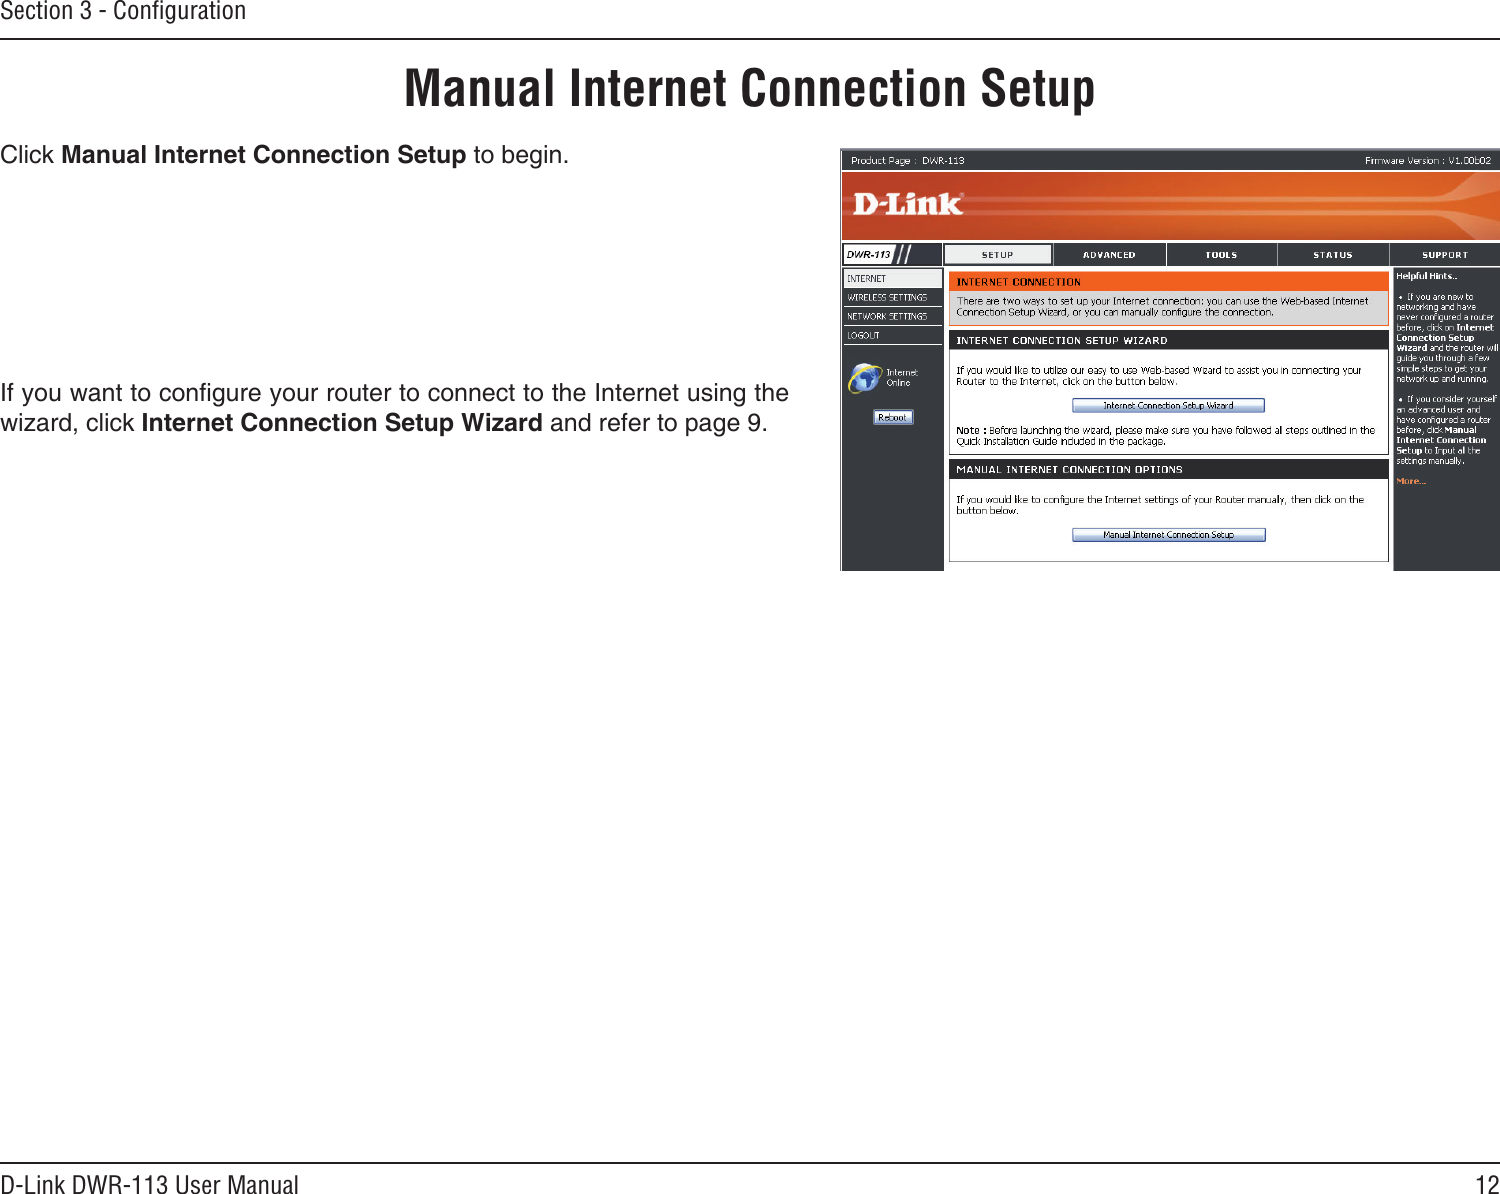 12D-Link DWR-113 User ManualSection 3 - ConﬁgurationManual Internet Connection SetupClick Manual Internet Connection Setup to begin.If you want to congure your router to connect to the Internet using the wizard, click Internet Connection Setup Wizard and refer to page 9.